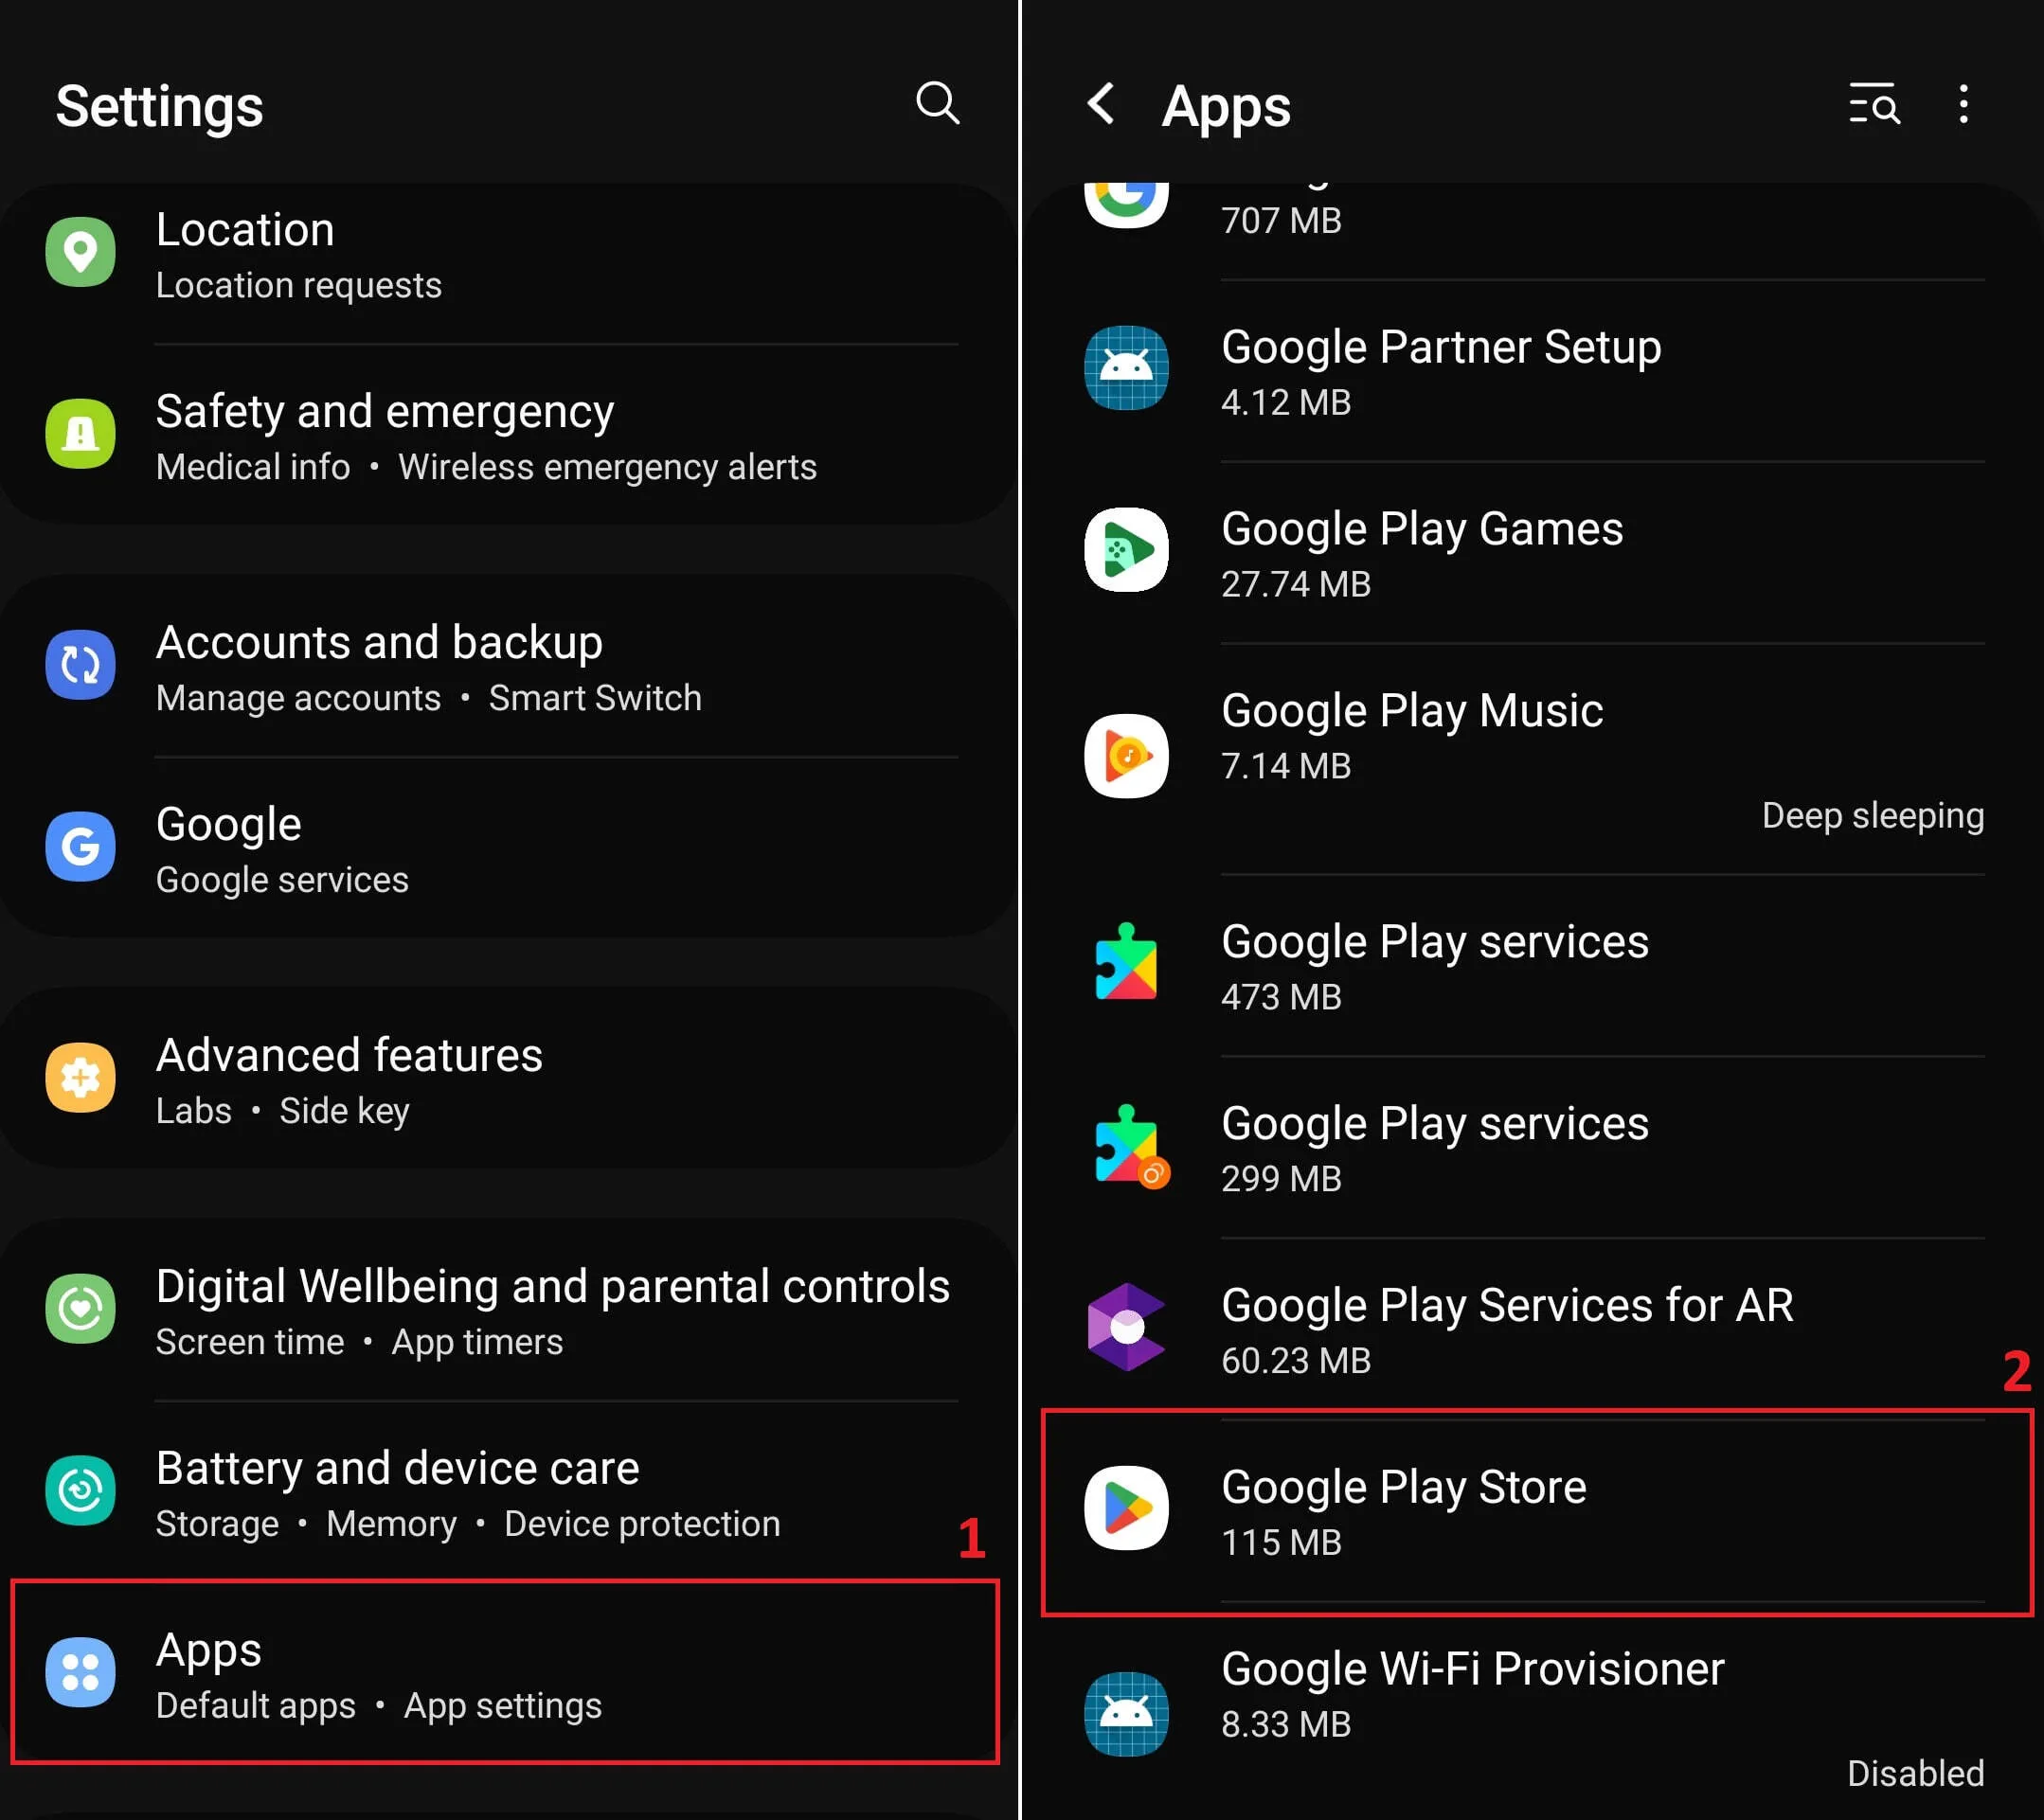 Search Play Store in the list with apps